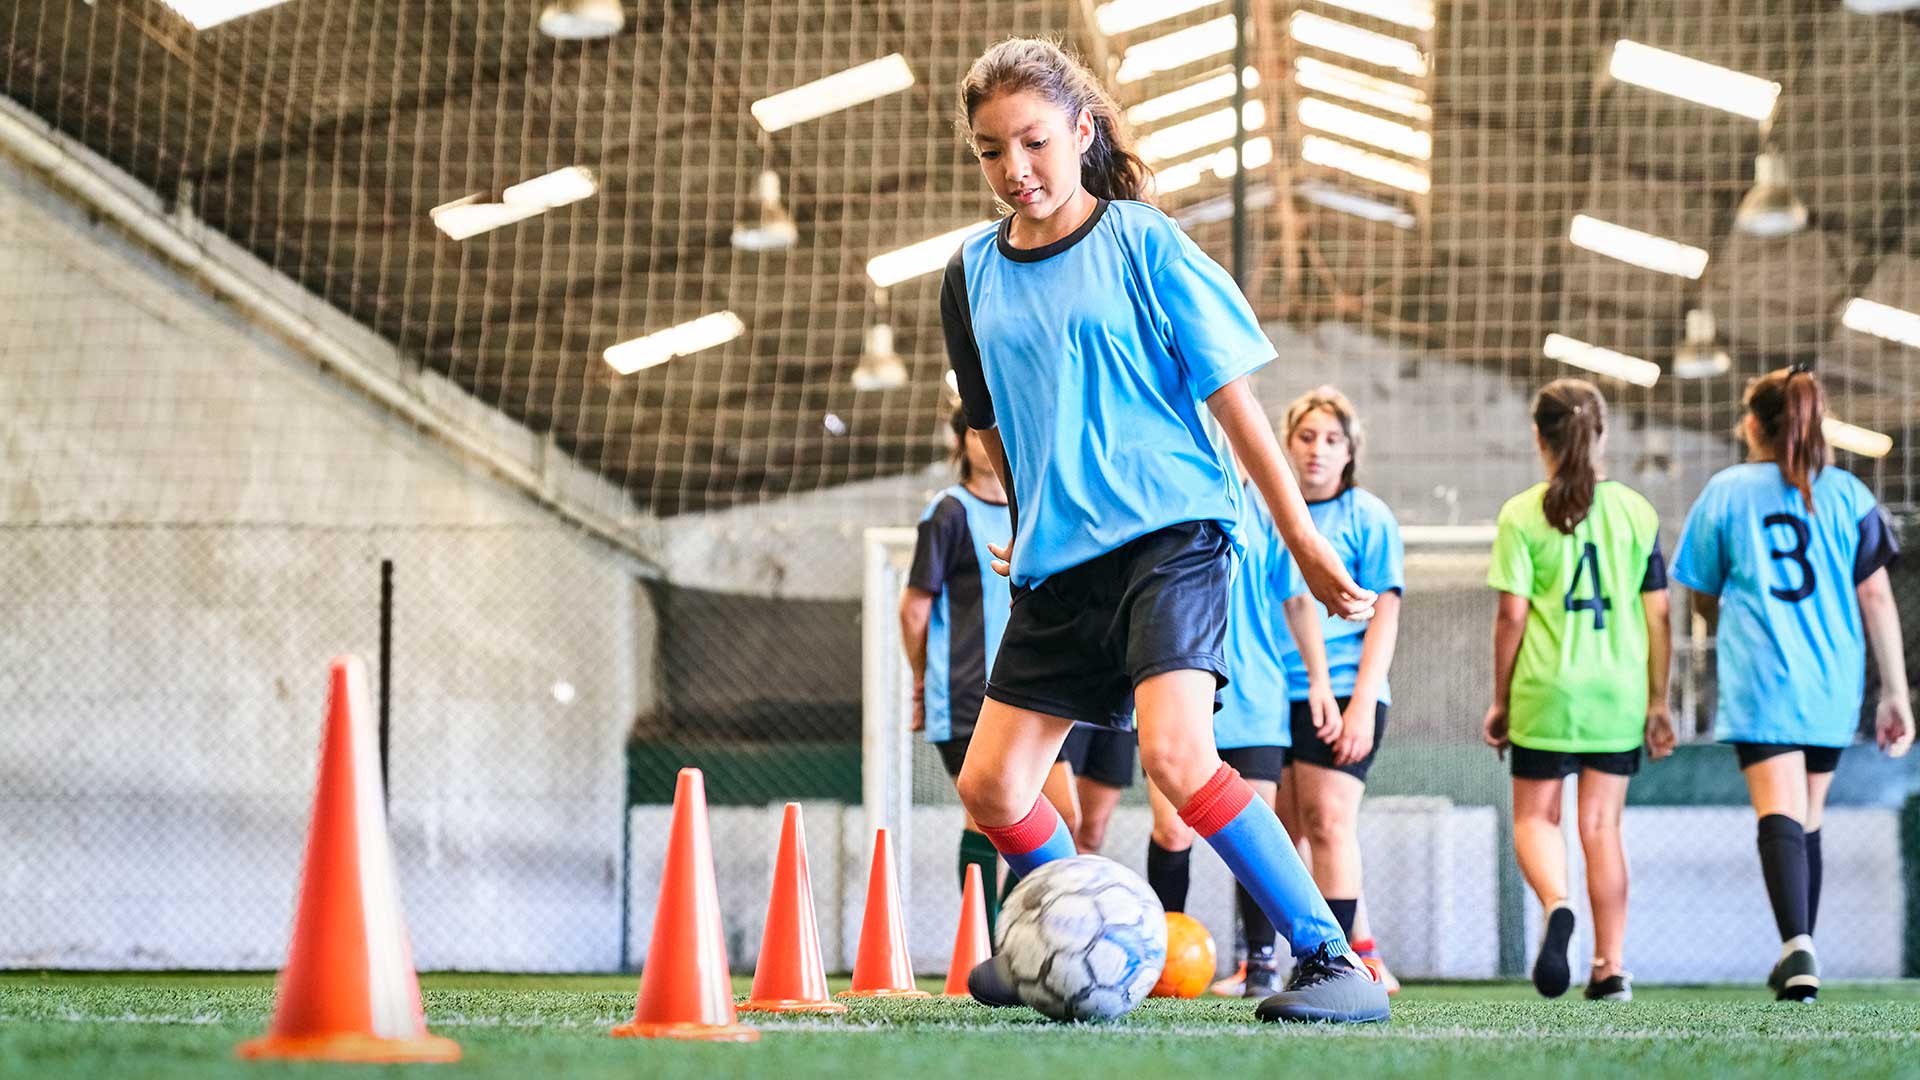 A young girl in a blue jersey and red socks dribbles a soccer ball through orange cones on an indoor field, with other players in the background.